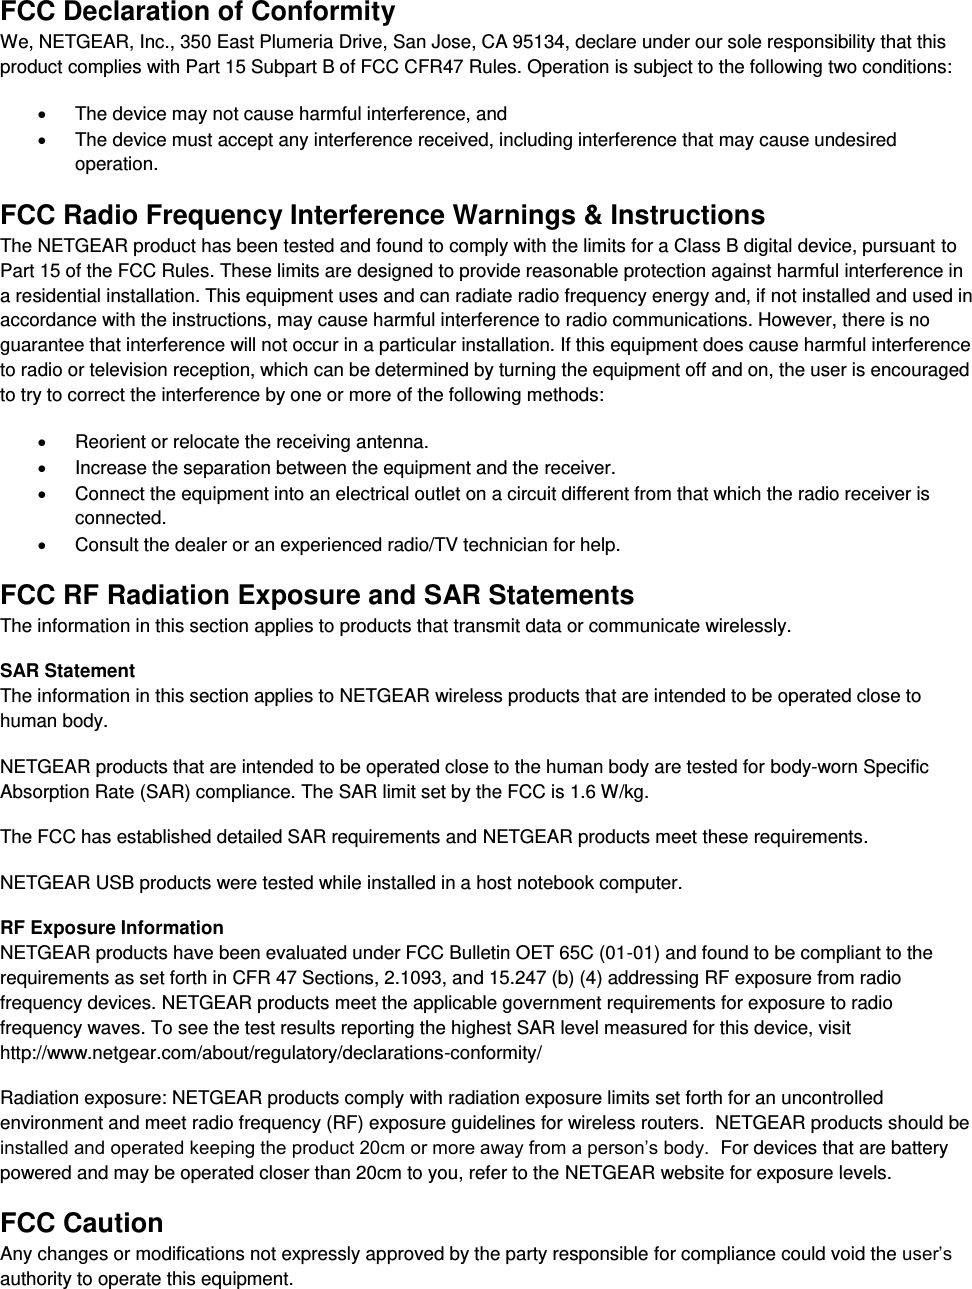  FCC Declaration of Conformity We, NETGEAR, Inc., 350 East Plumeria Drive, San Jose, CA 95134, declare under our sole responsibility that this product complies with Part 15 Subpart B of FCC CFR47 Rules. Operation is subject to the following two conditions:   The device may not cause harmful interference, and   The device must accept any interference received, including interference that may cause undesired operation. FCC Radio Frequency Interference Warnings &amp; Instructions The NETGEAR product has been tested and found to comply with the limits for a Class B digital device, pursuant to Part 15 of the FCC Rules. These limits are designed to provide reasonable protection against harmful interference in a residential installation. This equipment uses and can radiate radio frequency energy and, if not installed and used in accordance with the instructions, may cause harmful interference to radio communications. However, there is no guarantee that interference will not occur in a particular installation. If this equipment does cause harmful interference to radio or television reception, which can be determined by turning the equipment off and on, the user is encouraged to try to correct the interference by one or more of the following methods:   Reorient or relocate the receiving antenna.   Increase the separation between the equipment and the receiver.   Connect the equipment into an electrical outlet on a circuit different from that which the radio receiver is connected.   Consult the dealer or an experienced radio/TV technician for help. FCC RF Radiation Exposure and SAR Statements The information in this section applies to products that transmit data or communicate wirelessly. SAR Statement The information in this section applies to NETGEAR wireless products that are intended to be operated close to human body.  NETGEAR products that are intended to be operated close to the human body are tested for body-worn Specific Absorption Rate (SAR) compliance. The SAR limit set by the FCC is 1.6 W/kg. The FCC has established detailed SAR requirements and NETGEAR products meet these requirements. NETGEAR USB products were tested while installed in a host notebook computer.  RF Exposure Information NETGEAR products have been evaluated under FCC Bulletin OET 65C (01-01) and found to be compliant to the requirements as set forth in CFR 47 Sections, 2.1093, and 15.247 (b) (4) addressing RF exposure from radio frequency devices. NETGEAR products meet the applicable government requirements for exposure to radio frequency waves. To see the test results reporting the highest SAR level measured for this device, visit http://www.netgear.com/about/regulatory/declarations-conformity/ Radiation exposure: NETGEAR products comply with radiation exposure limits set forth for an uncontrolled environment and meet radio frequency (RF) exposure guidelines for wireless routers.  NETGEAR products should be installed and operated keeping the product 20cm or more away from a person’s body.  For devices that are battery powered and may be operated closer than 20cm to you, refer to the NETGEAR website for exposure levels. FCC Caution Any changes or modifications not expressly approved by the party responsible for compliance could void the user’s authority to operate this equipment. 